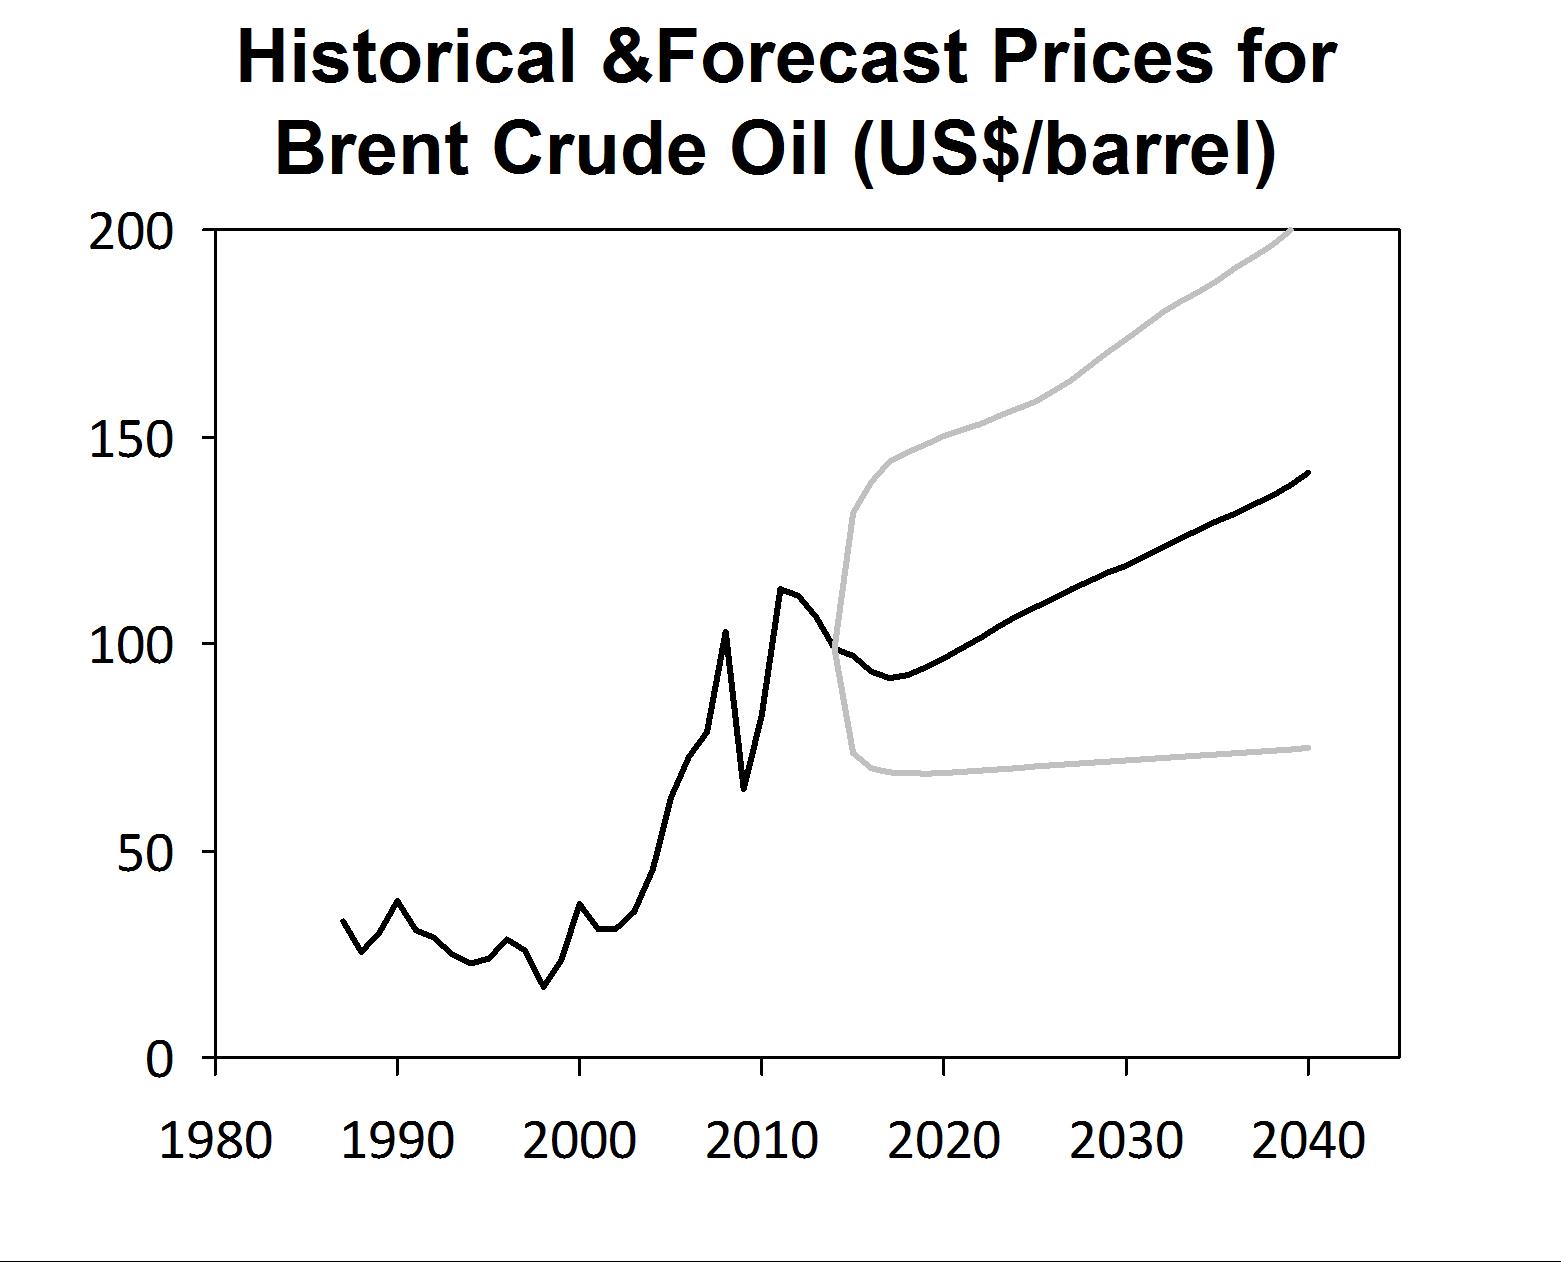 Figure 3. Oil price rises are not expected for the next decade, but the forecasts are highly uncertain (Source: U.S. Energy Information Administration Annual Energy Outlook 2014).